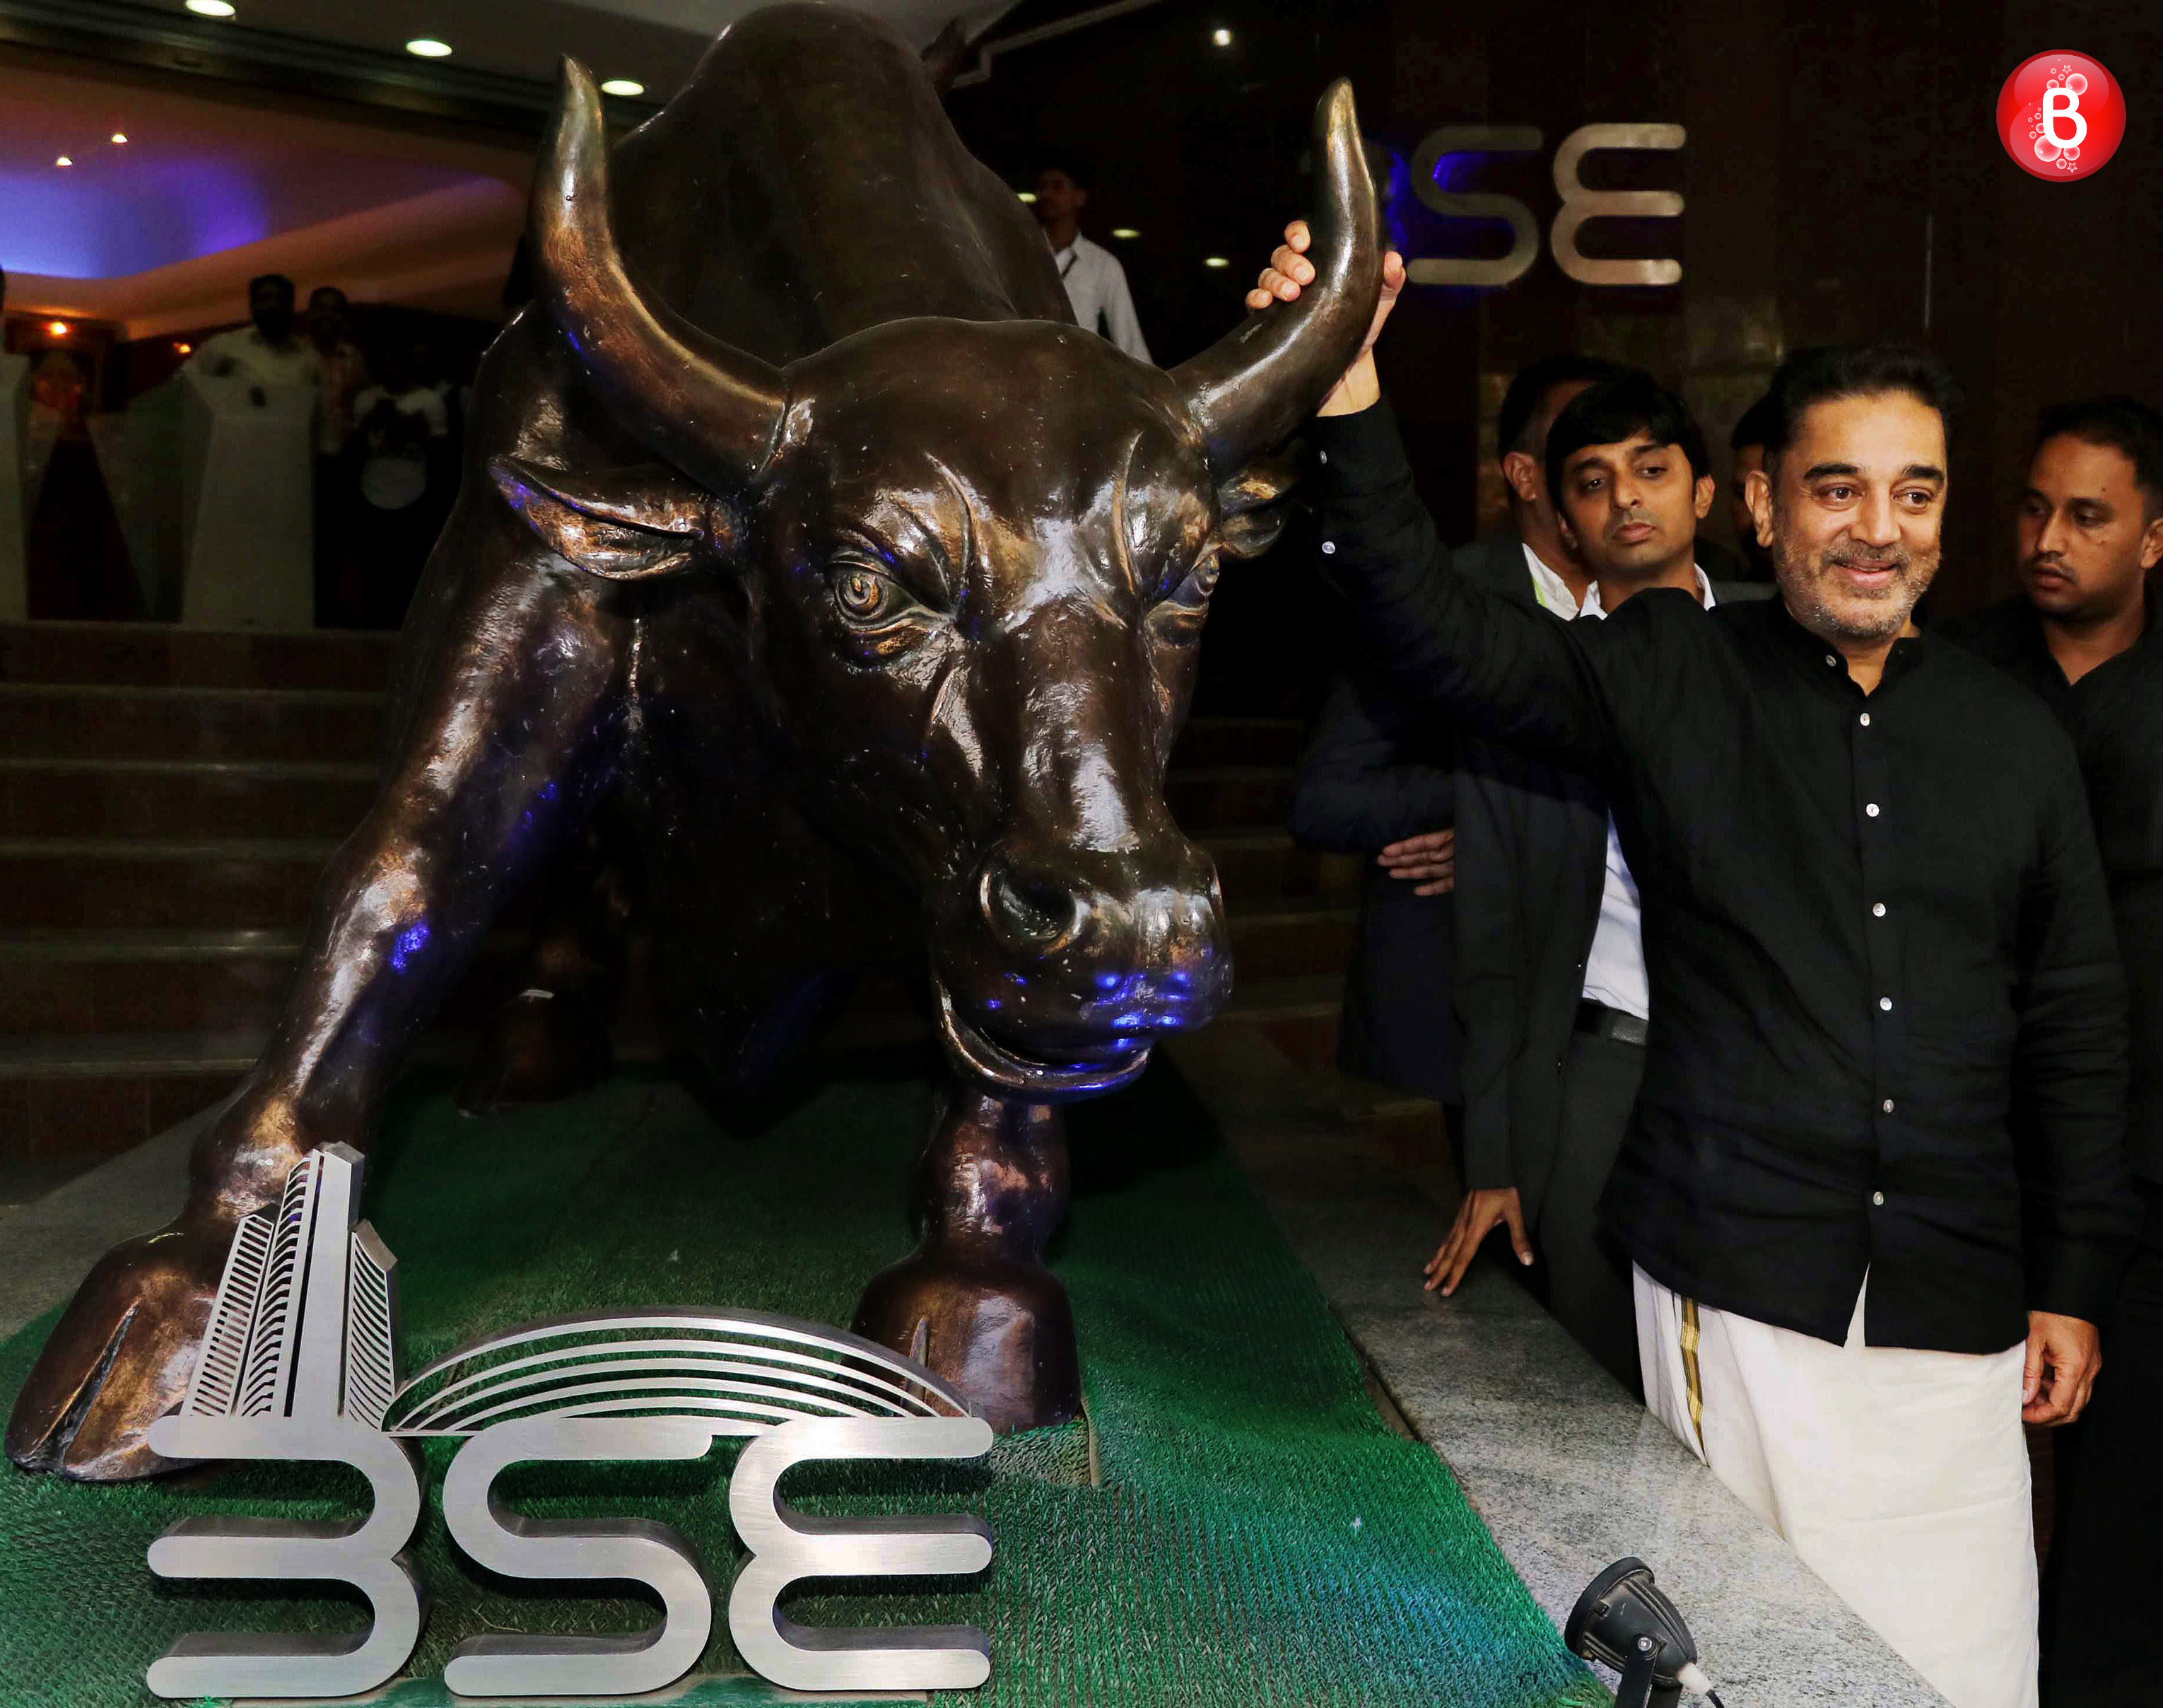 kamal hassan’s pictures at bombay stock exchange